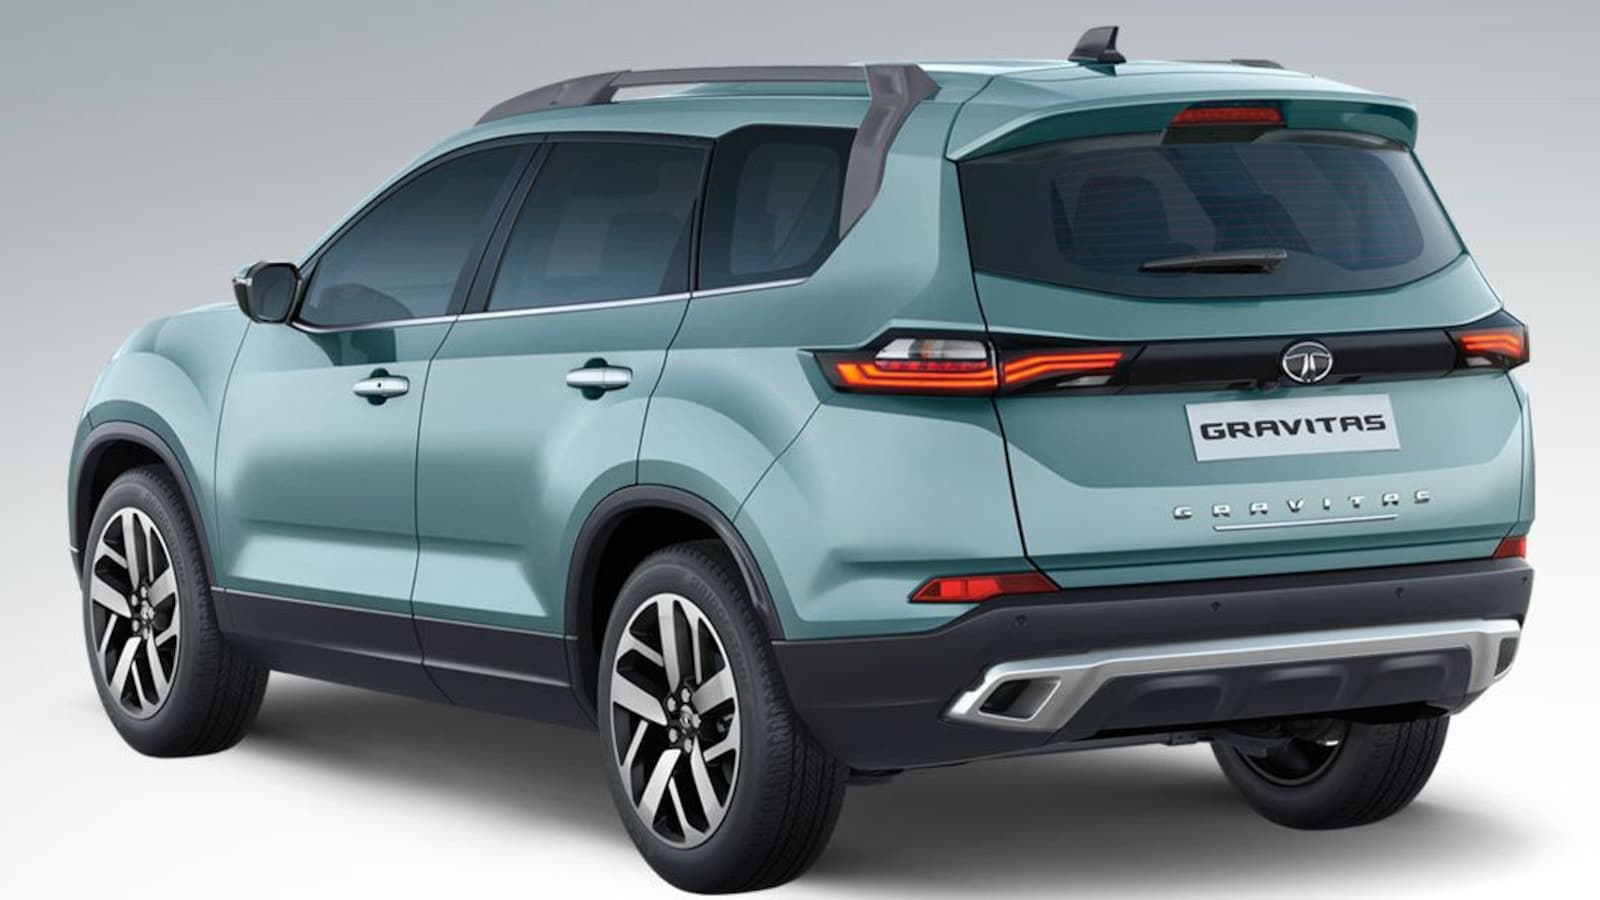 Tata Gravitas 7 Seater Suv To Be Unveiled On Republic Day 2021